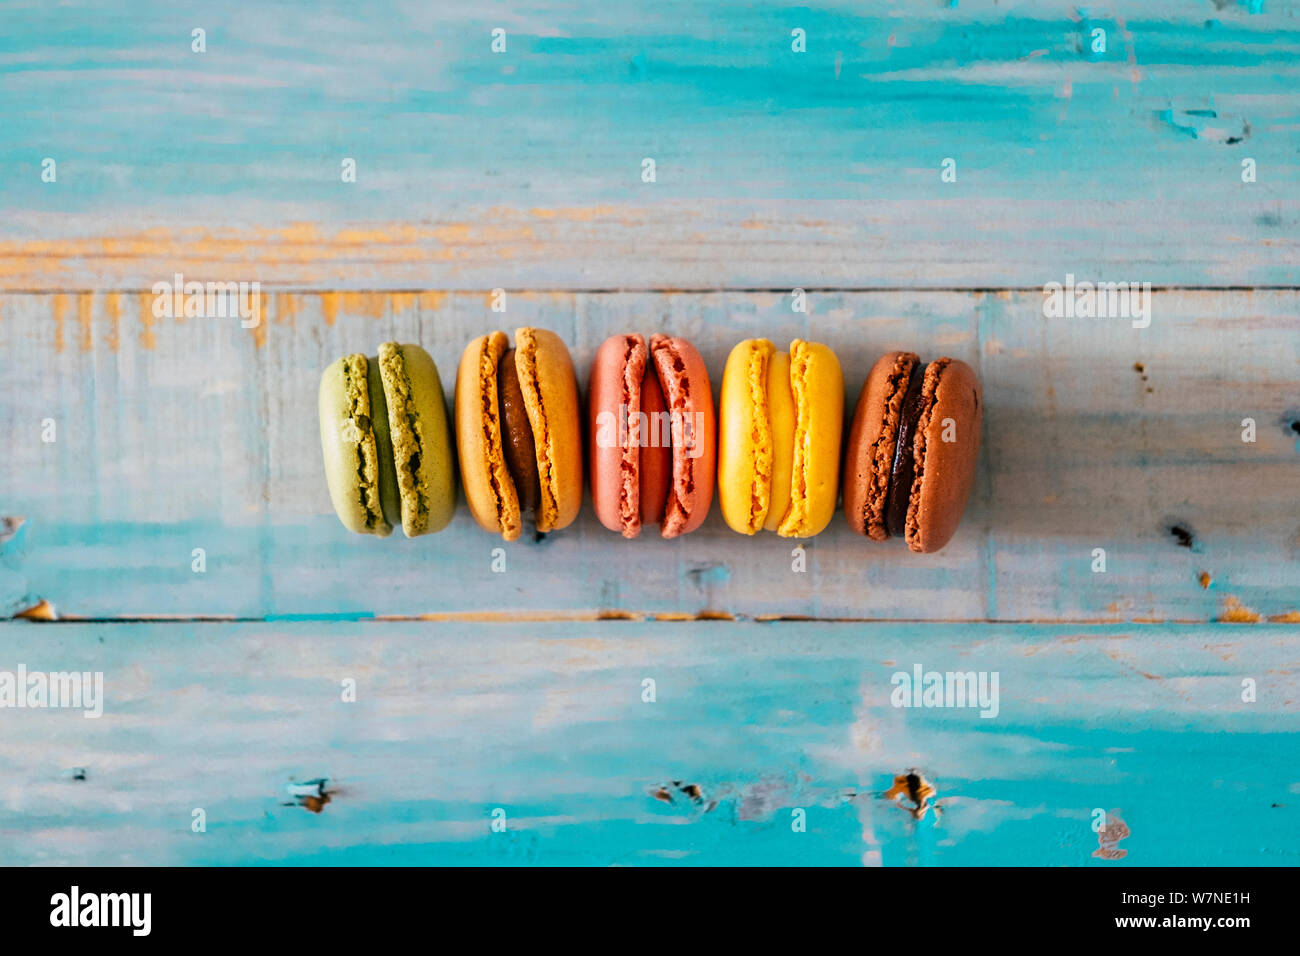 Coloured macarones biscuits on a blue wooden table background - concept of bakery and party lifestyle with sweet snacks - food decorations viewed from Stock Photo